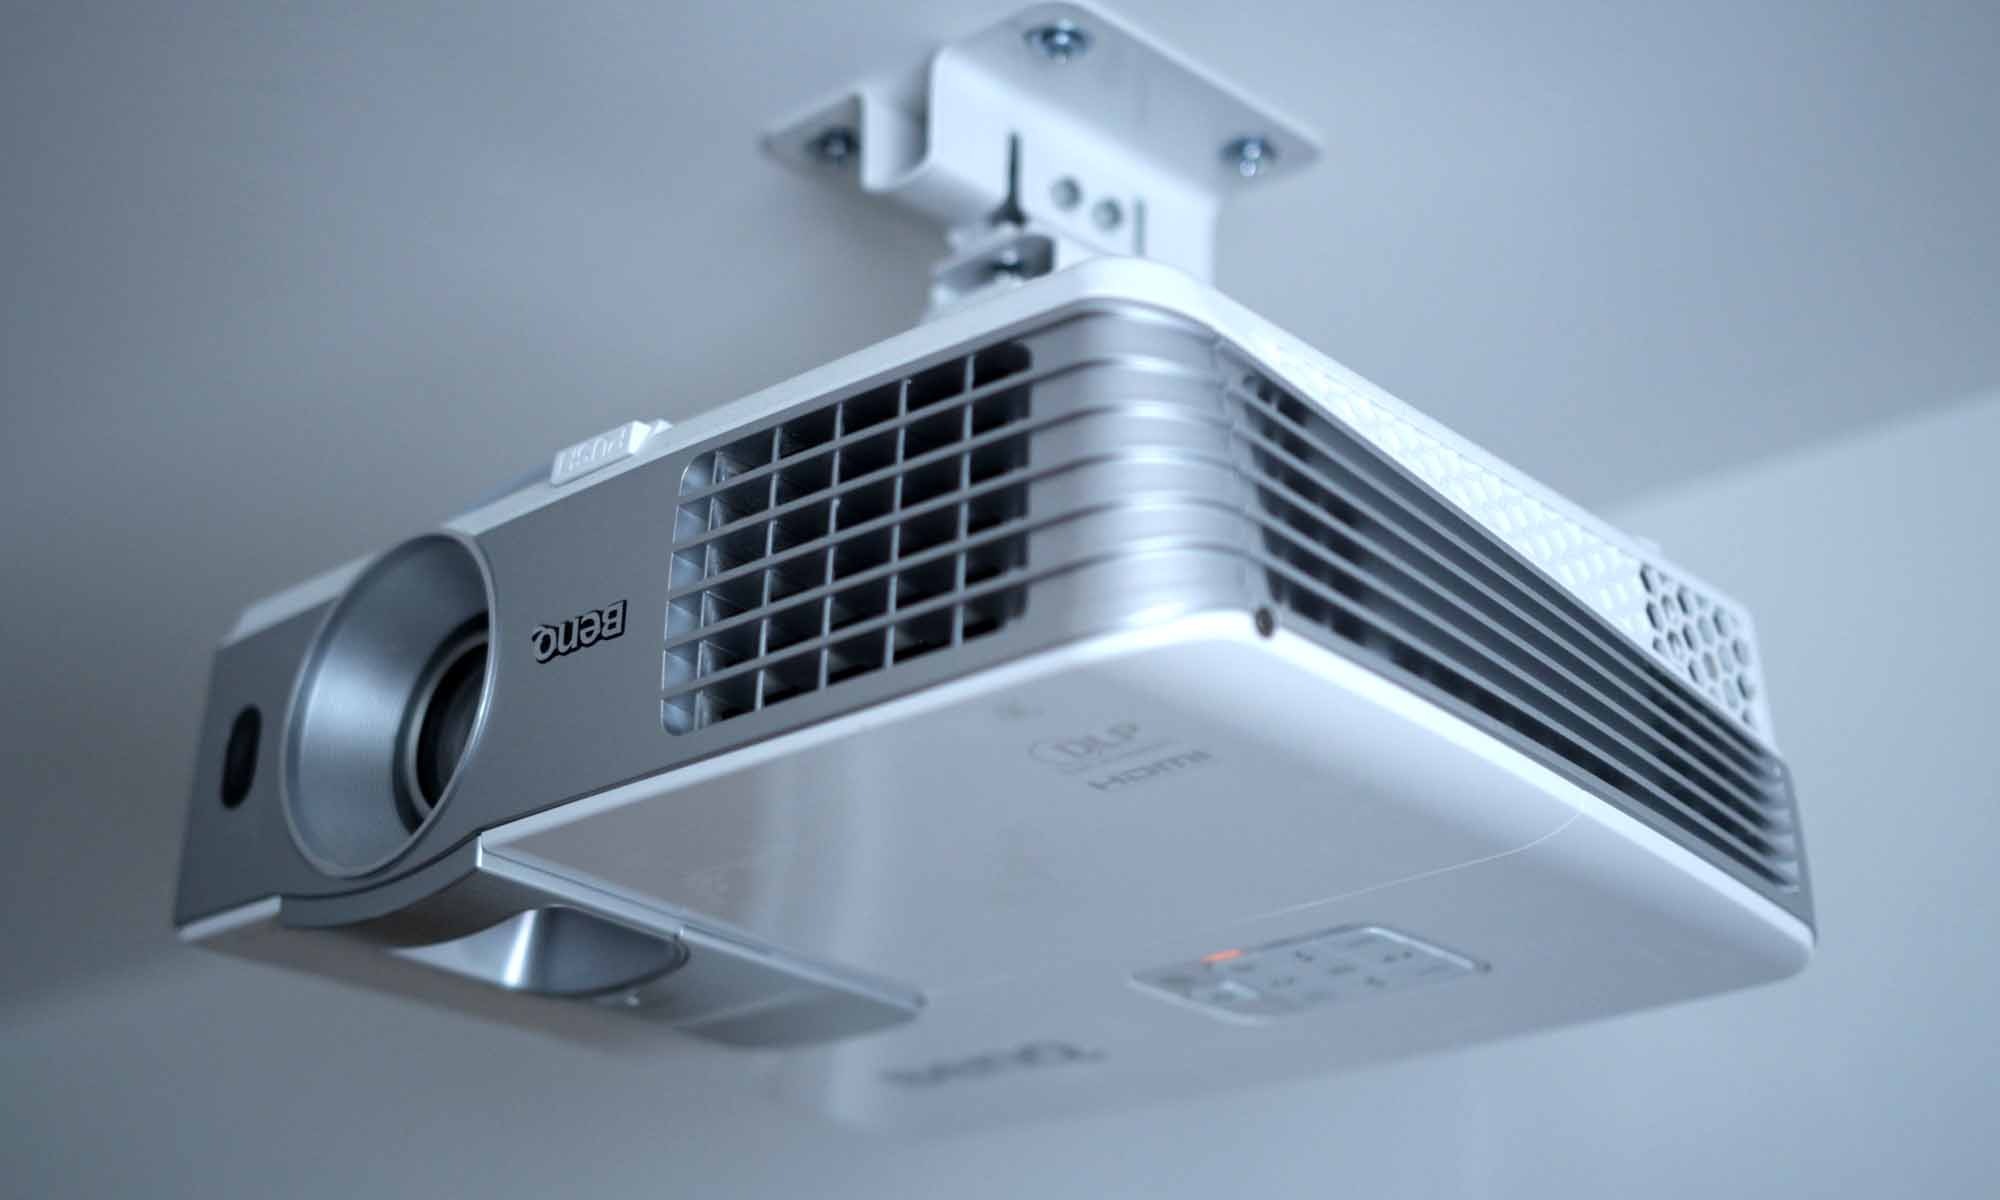 How To Install Projector To Ceiling